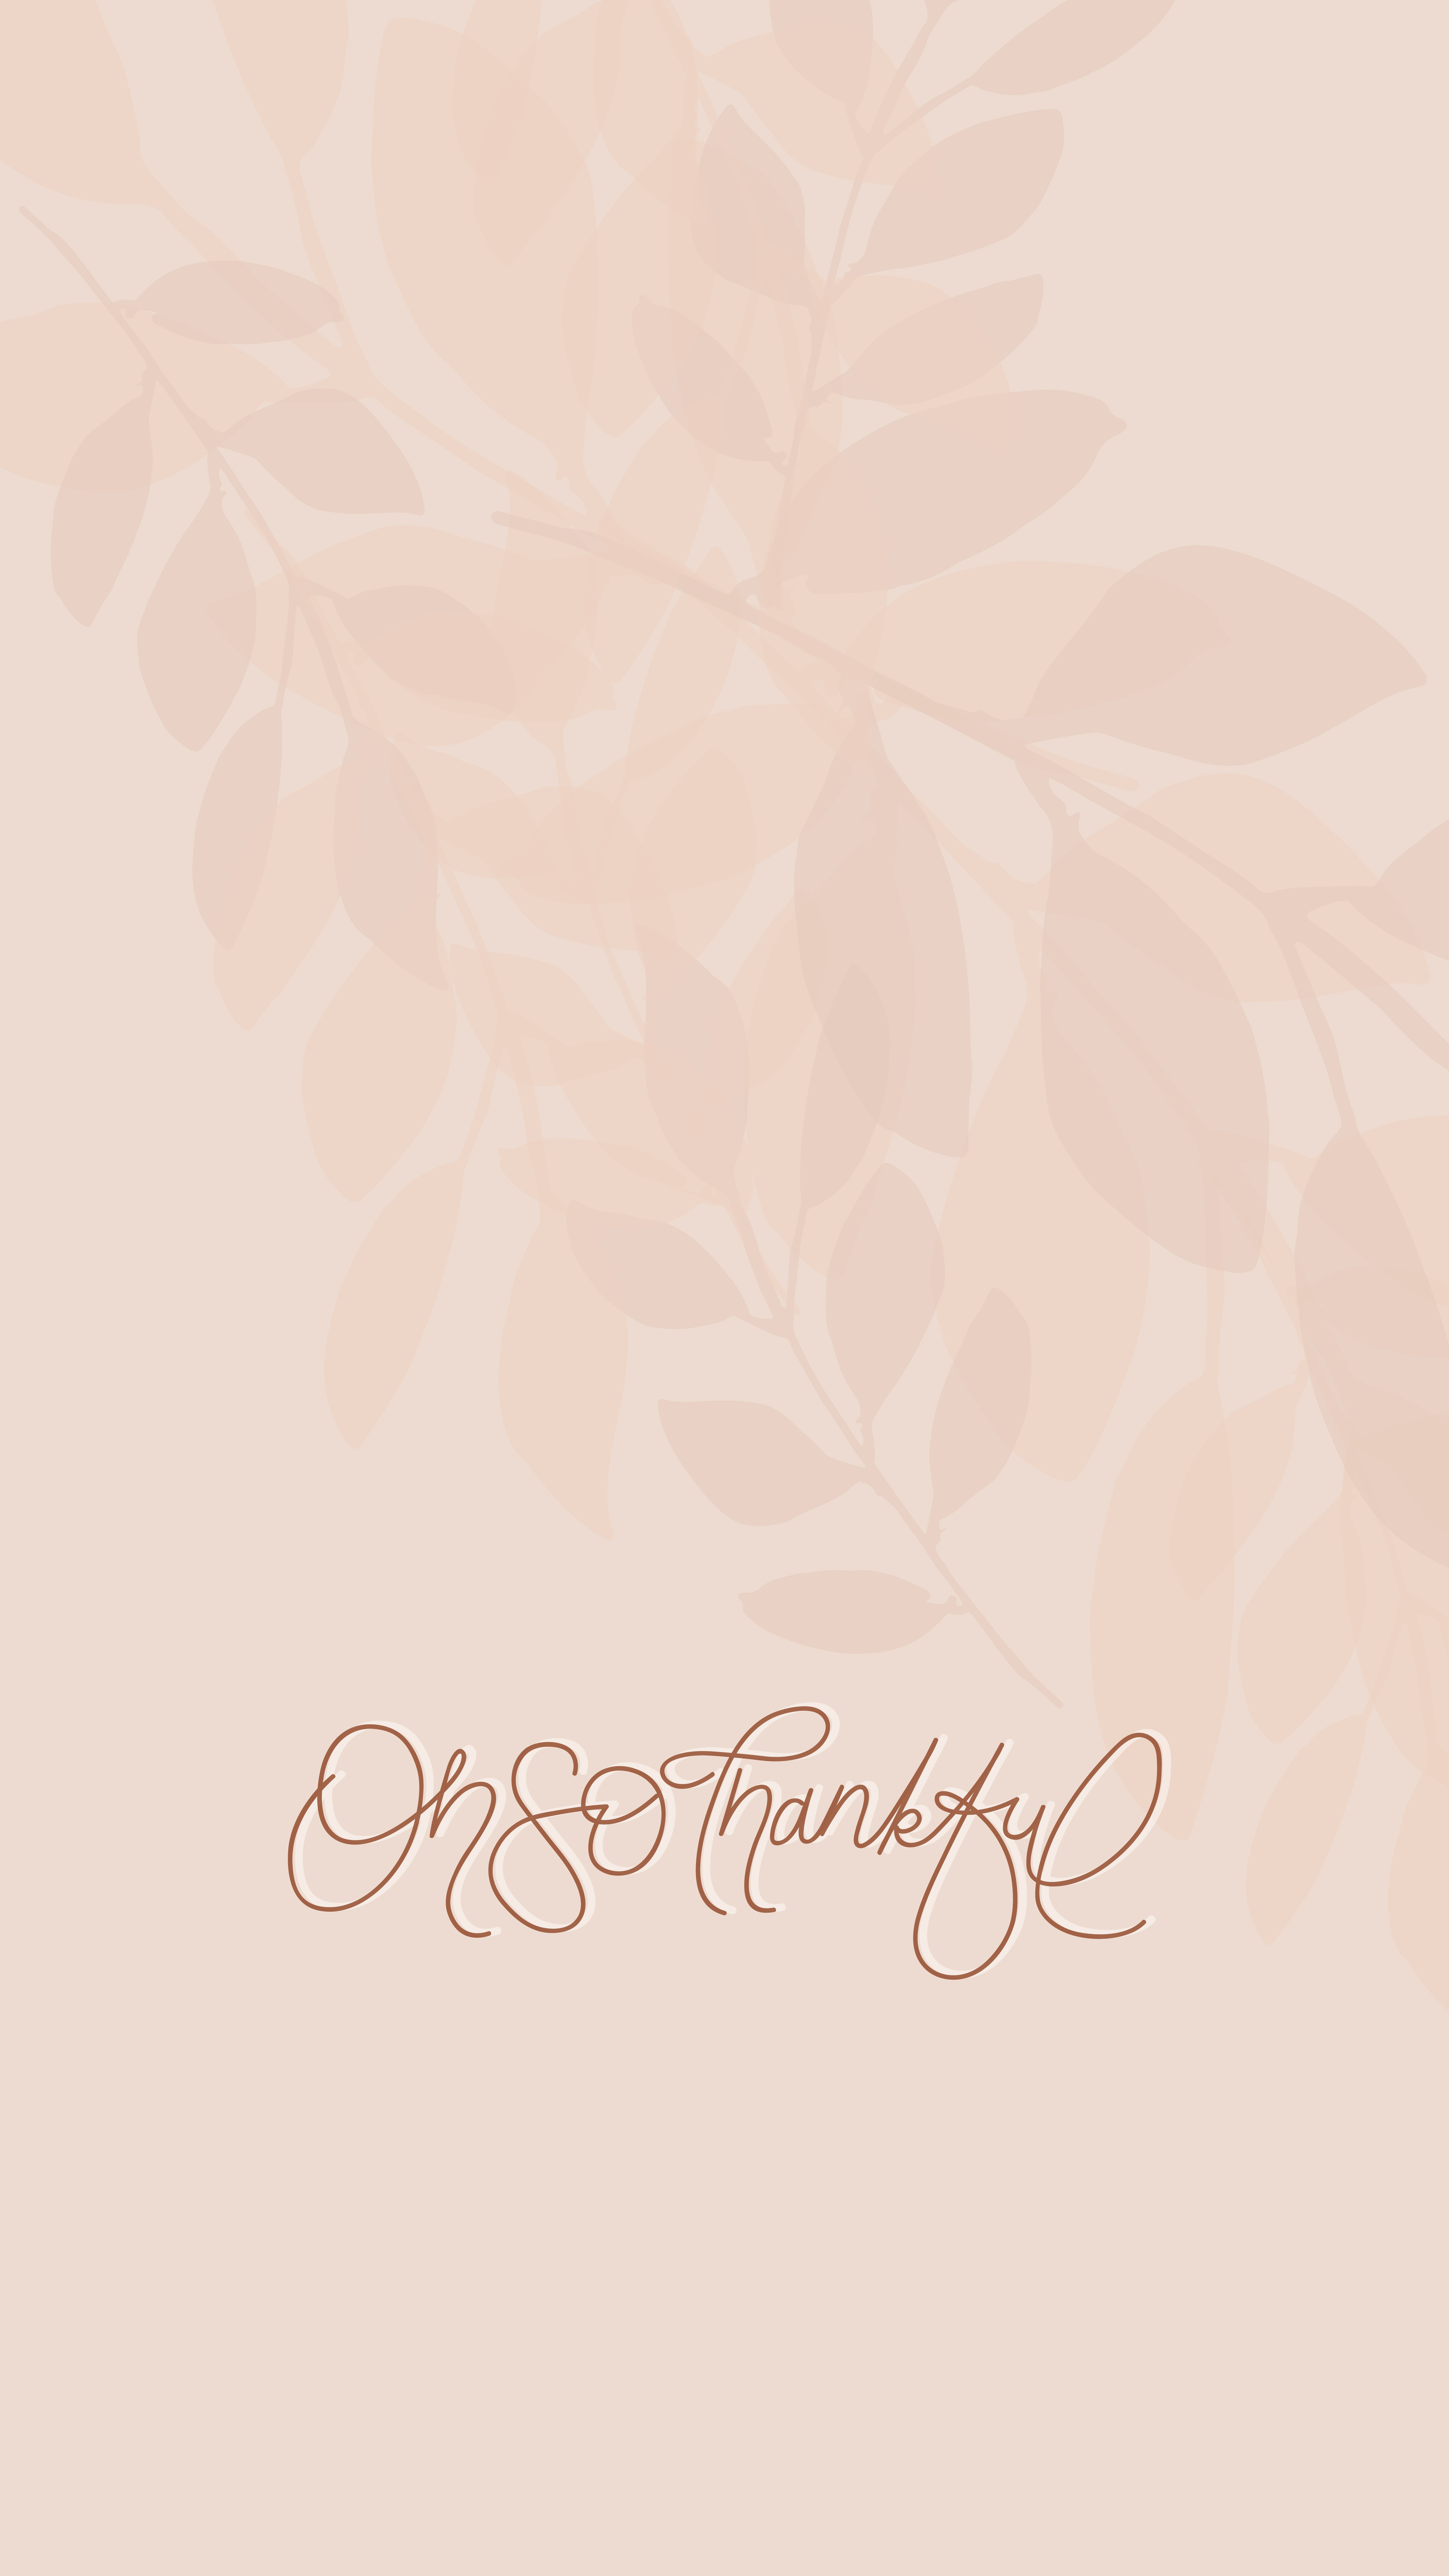 Oh So Thankful November Wallpaper Styld By Grace